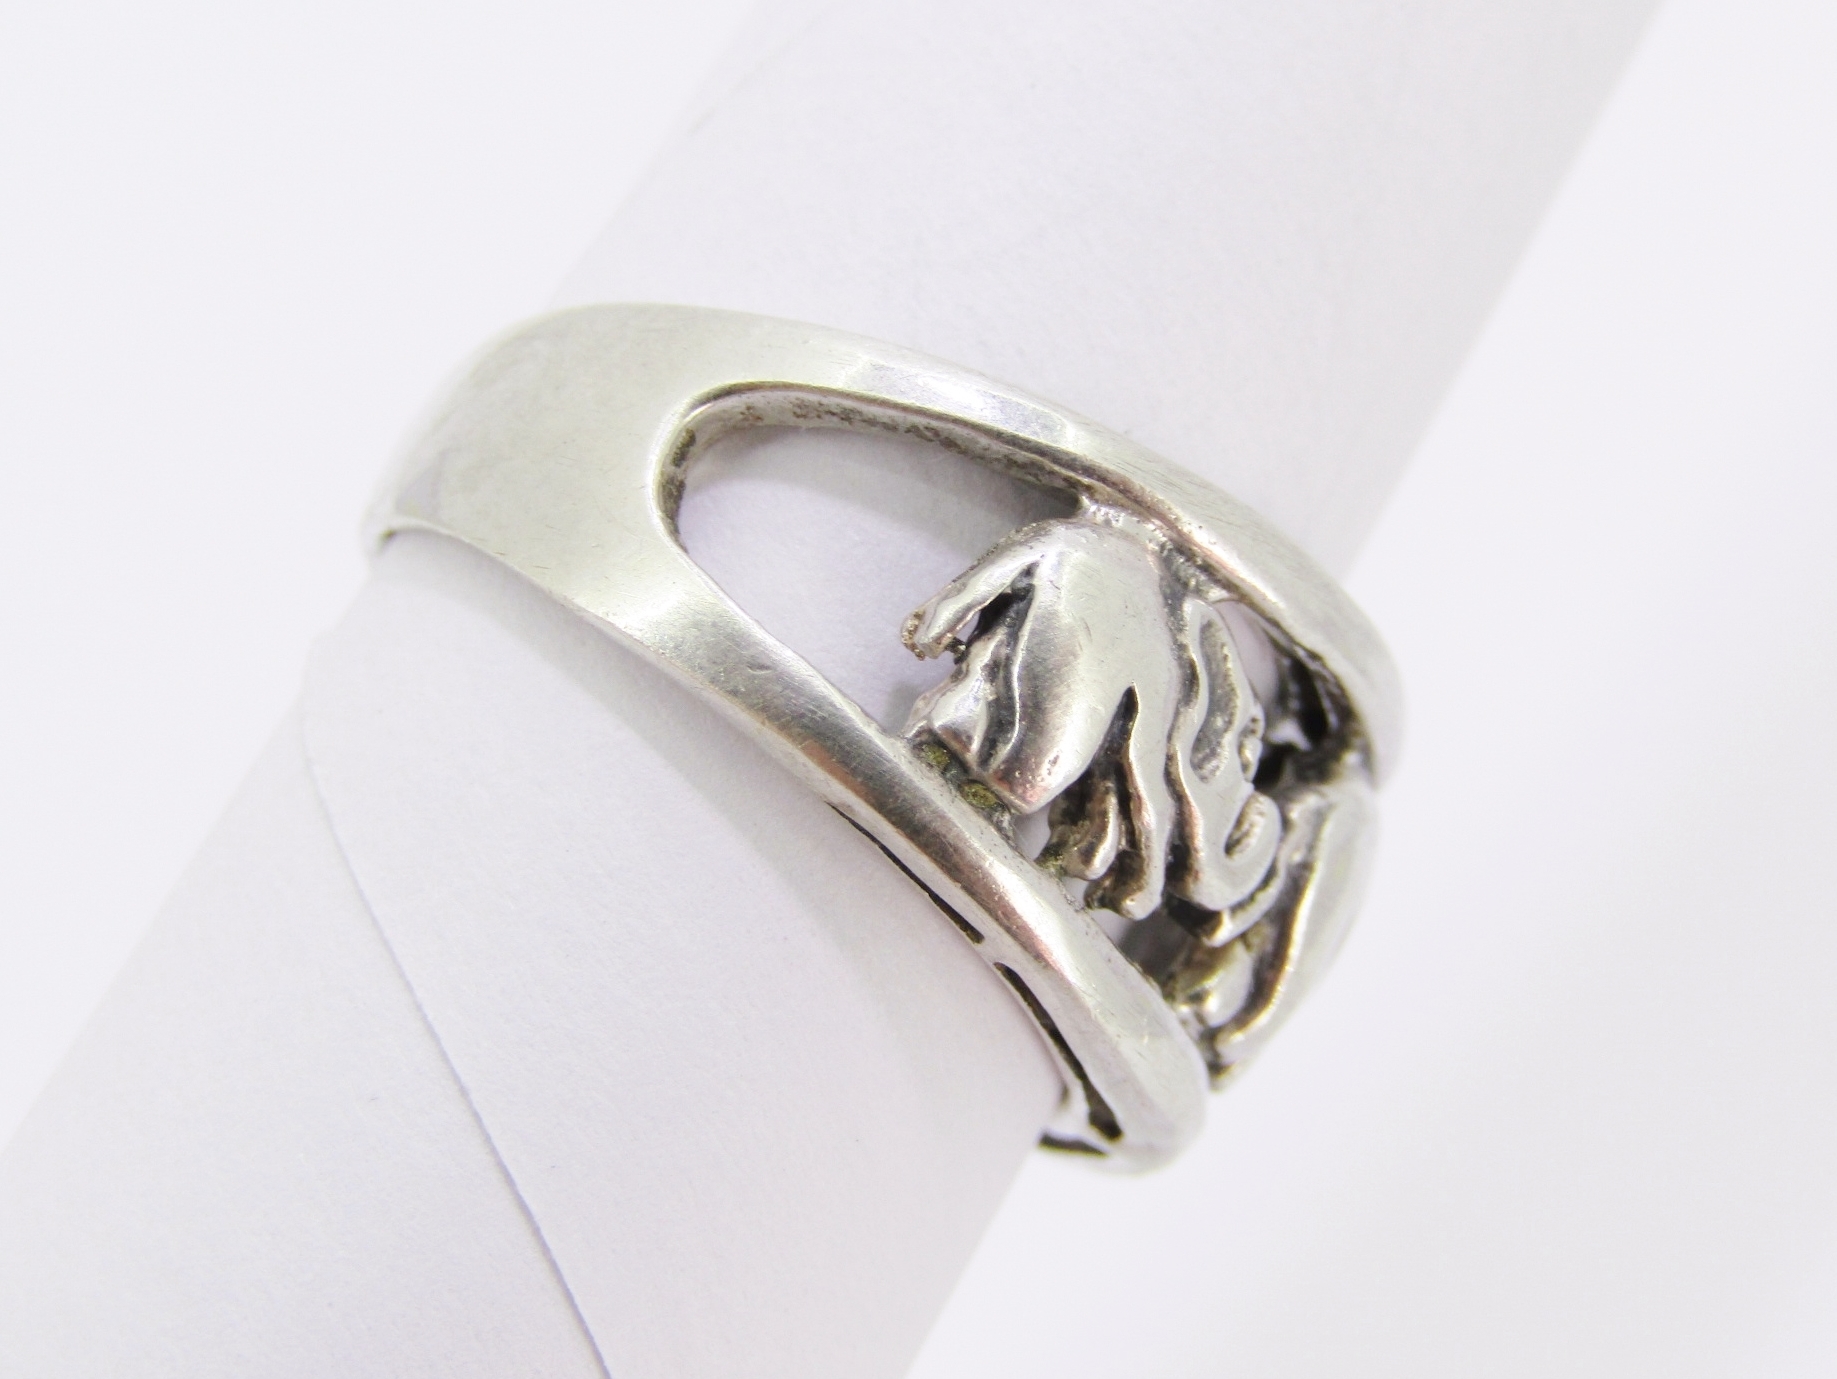 Stunning Elephant Design Band in Sterling Silver.